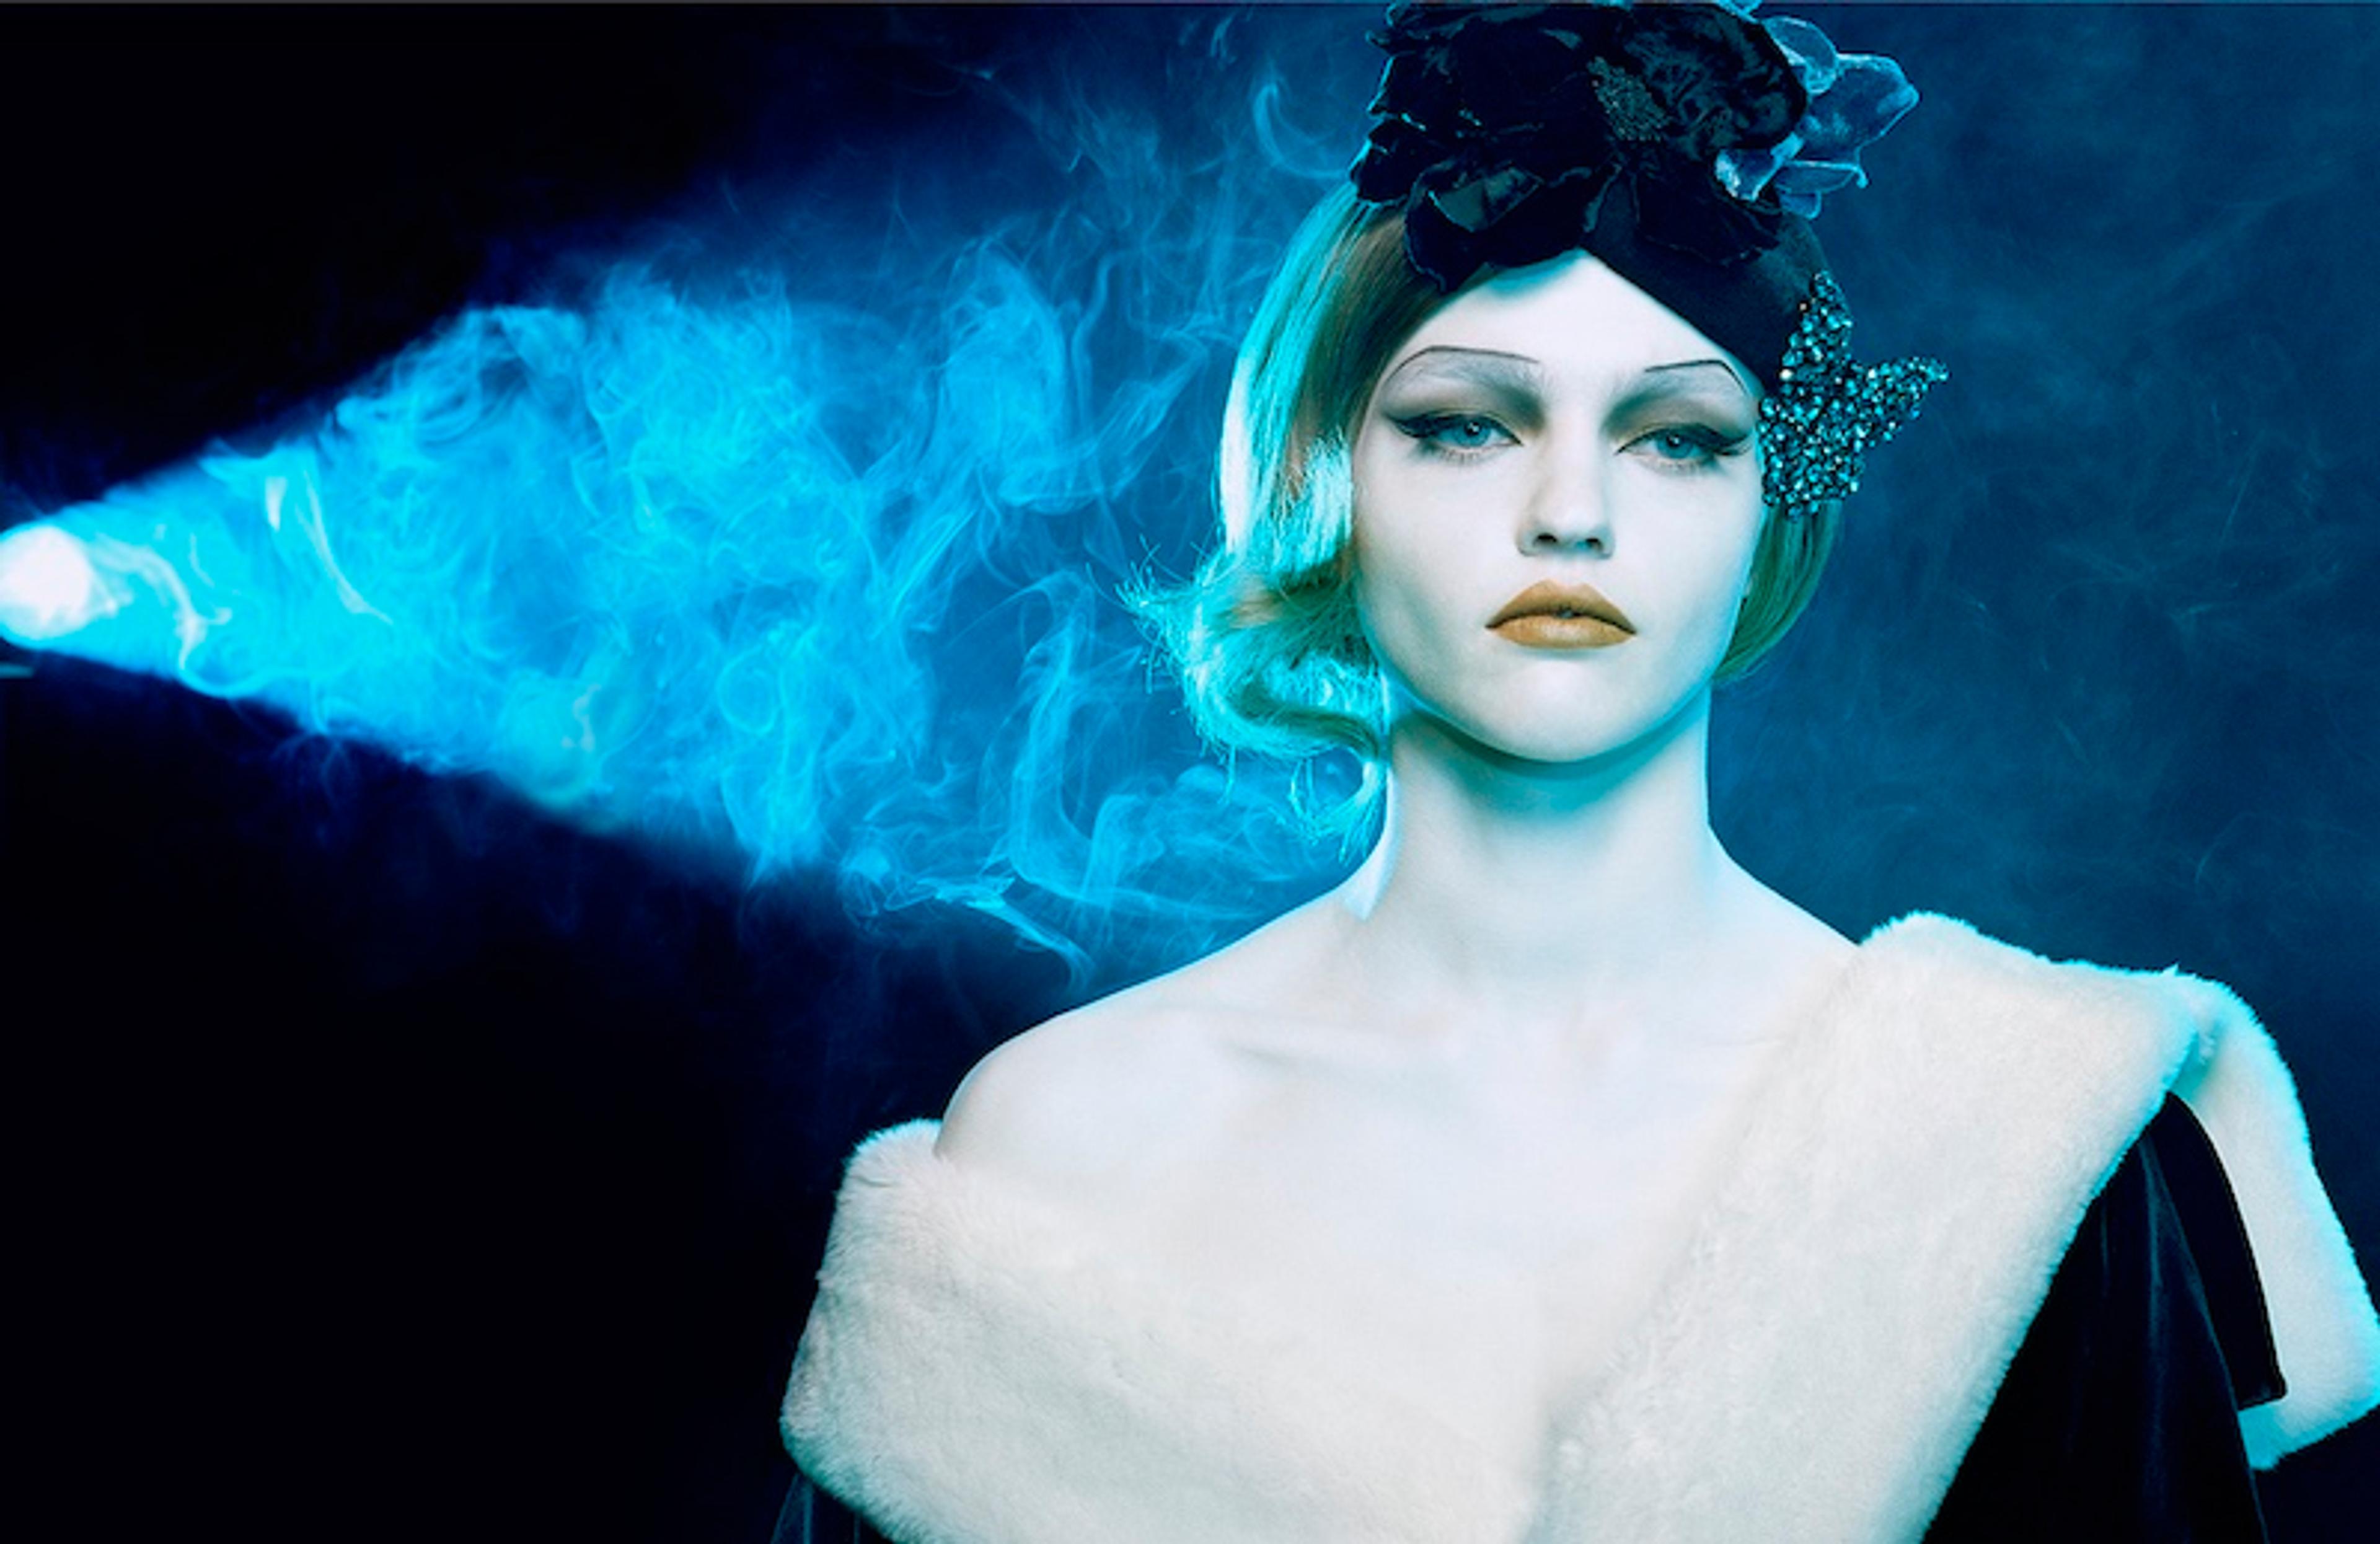 A photograph of a pale woman wearing a fur coat and flapper-style headdress, surrounded by smoke and illuminated by a blue light